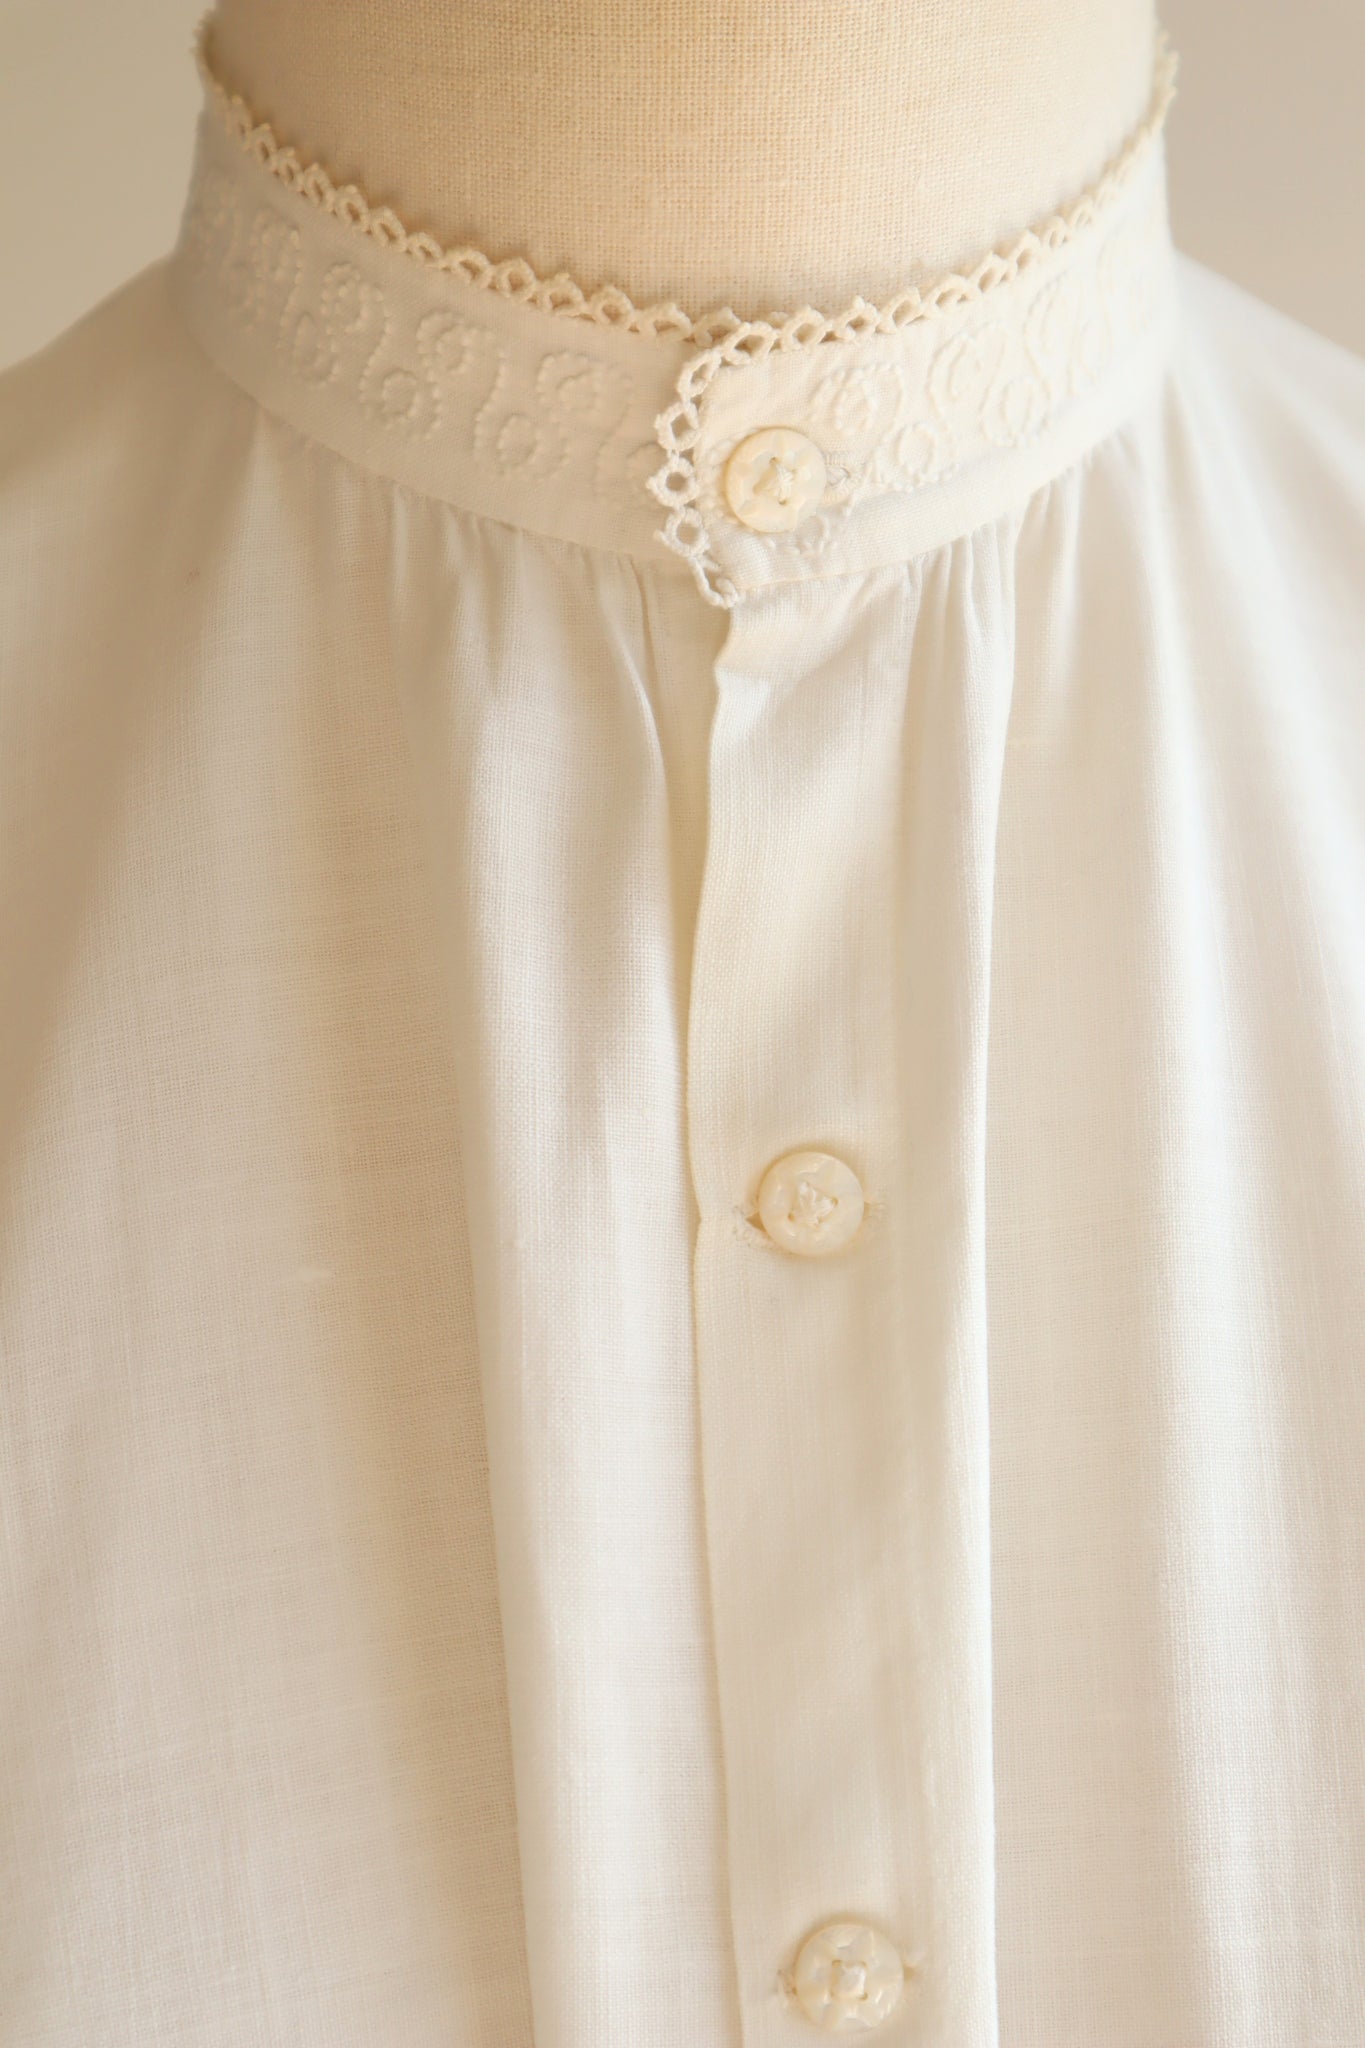 Late 1800s All Hand Sewn Cotton Blouse